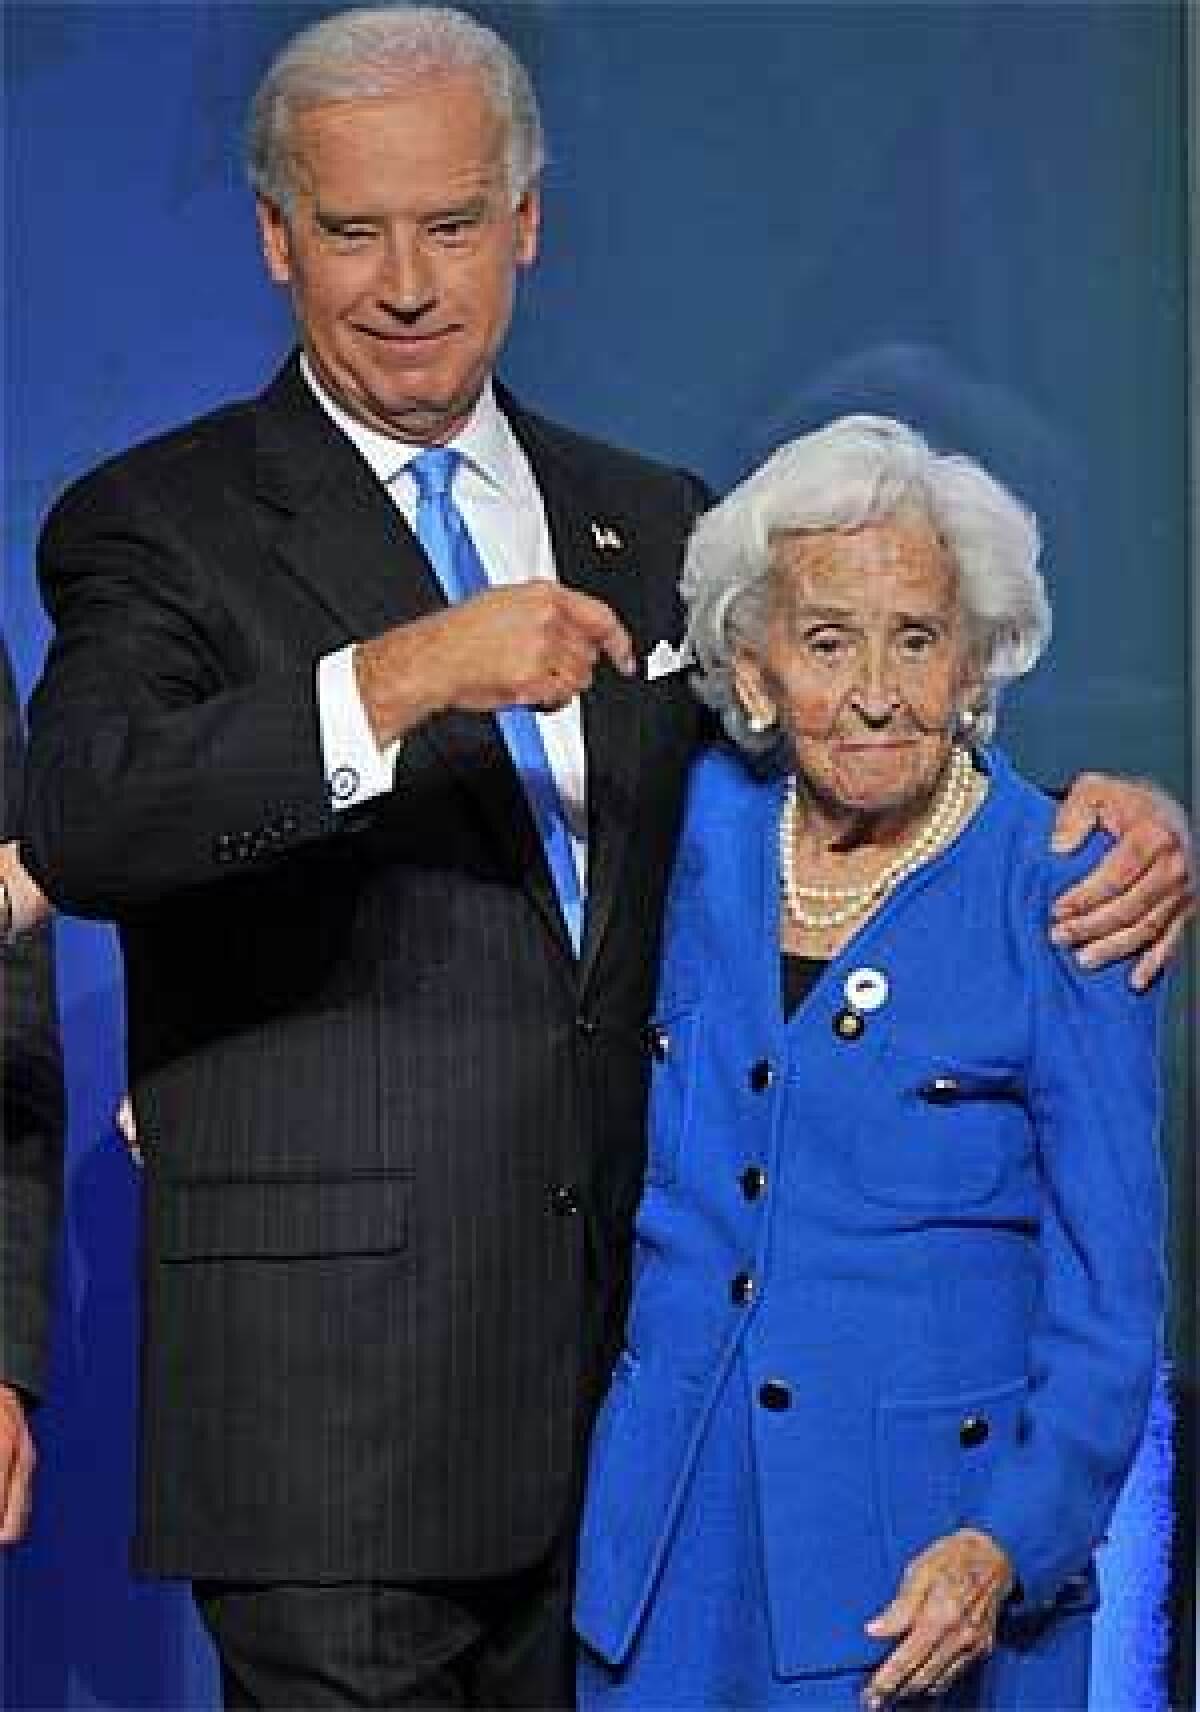 Joe Biden pointing to his mother, Jean Finnegan Biden, on stage during the 2008 Democratic National Convention in Denver.